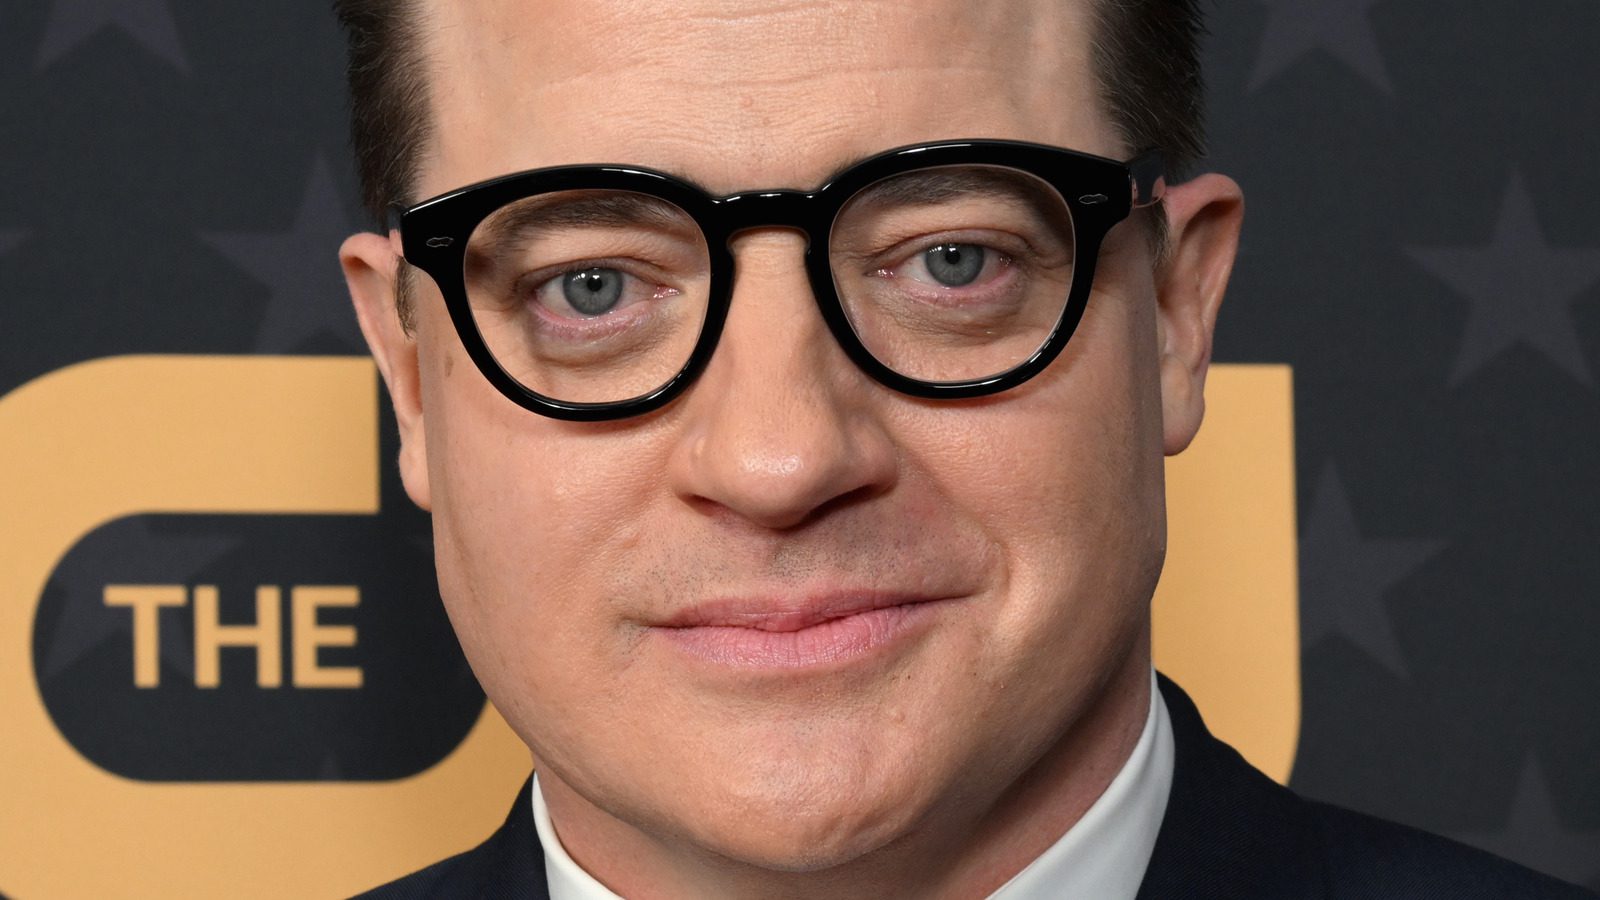 Brendan Fraser Takes Home The Critic's Choice Award For Best Actor (& Why That's Huge For His Oscars Chances)